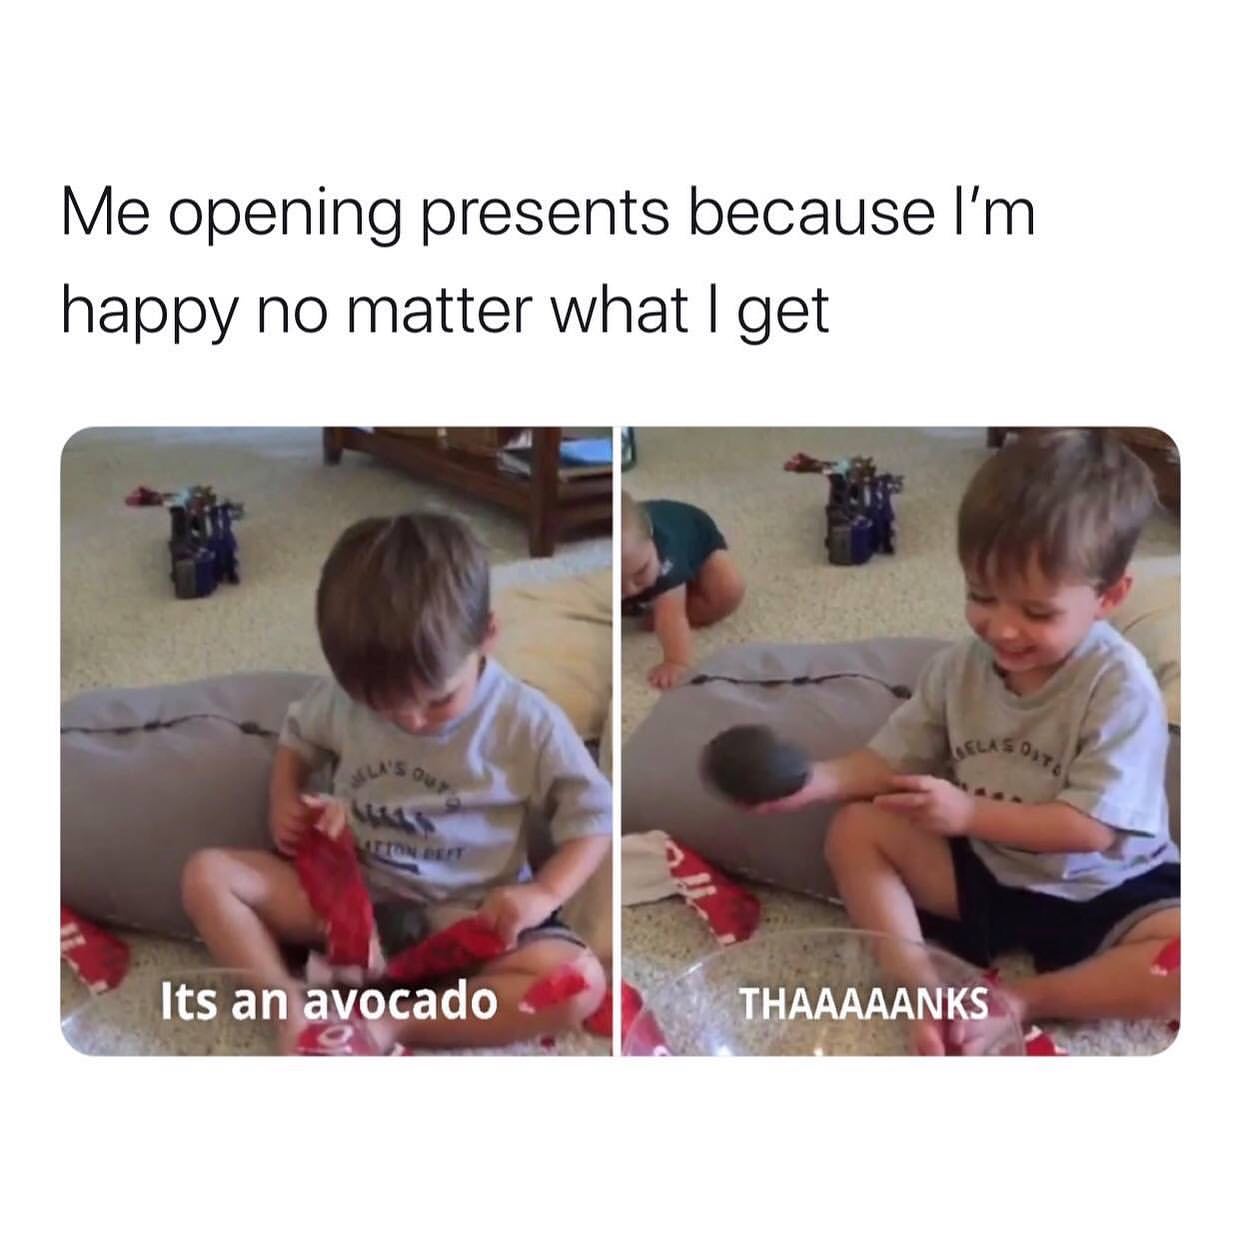 Me opening presents because I'm happy no matter what I get. Its an avocado. Thaaaaanks.